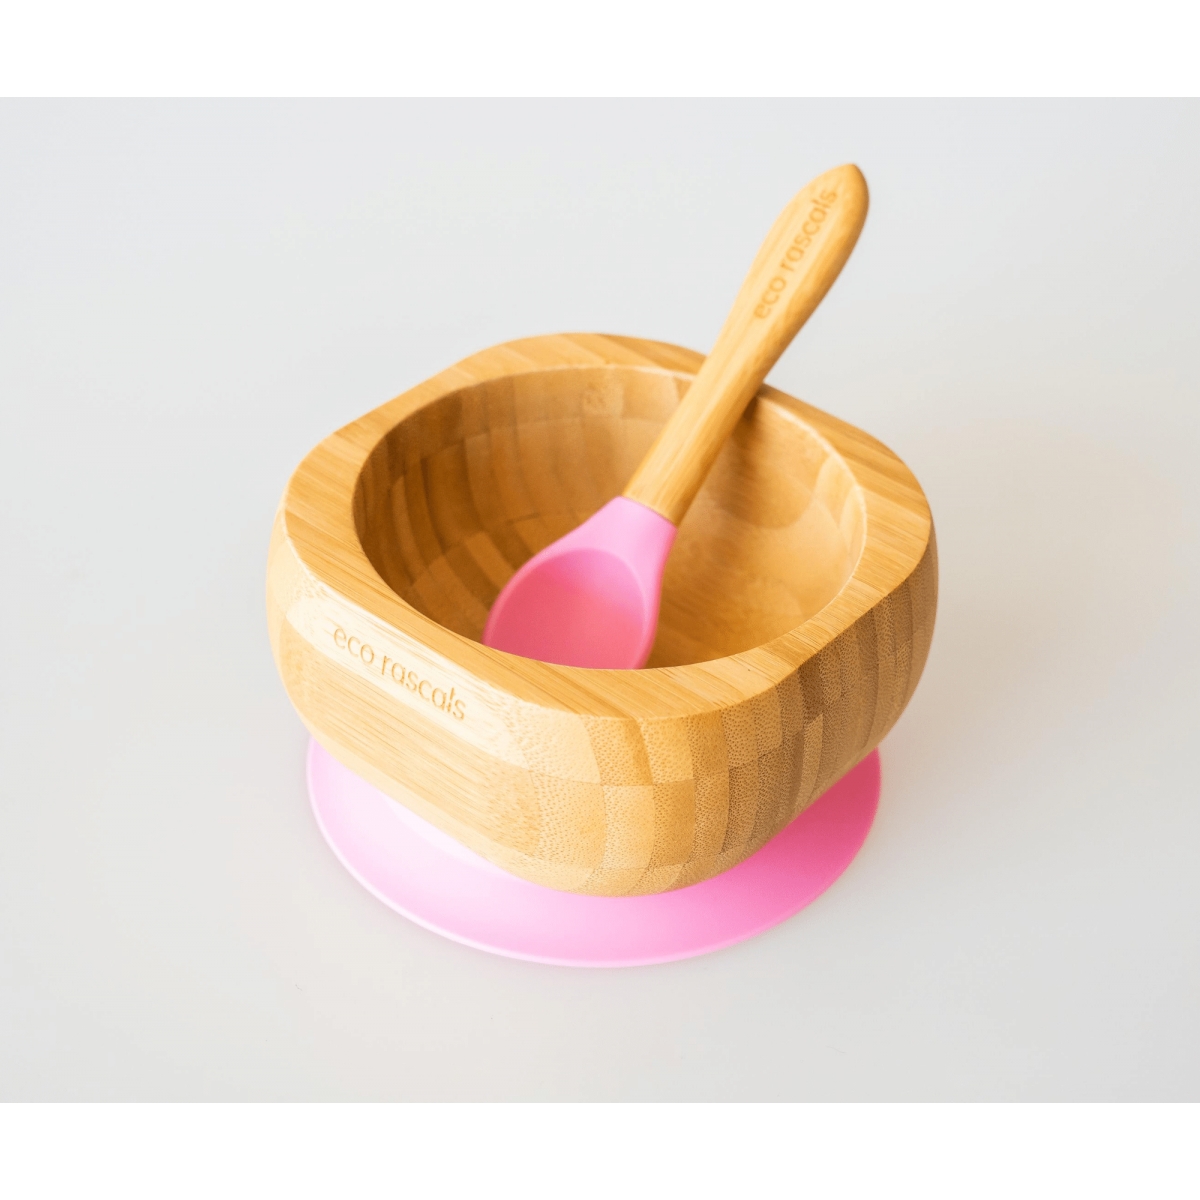 eco rascals Bamboo Suction Bowl & Spoon Set